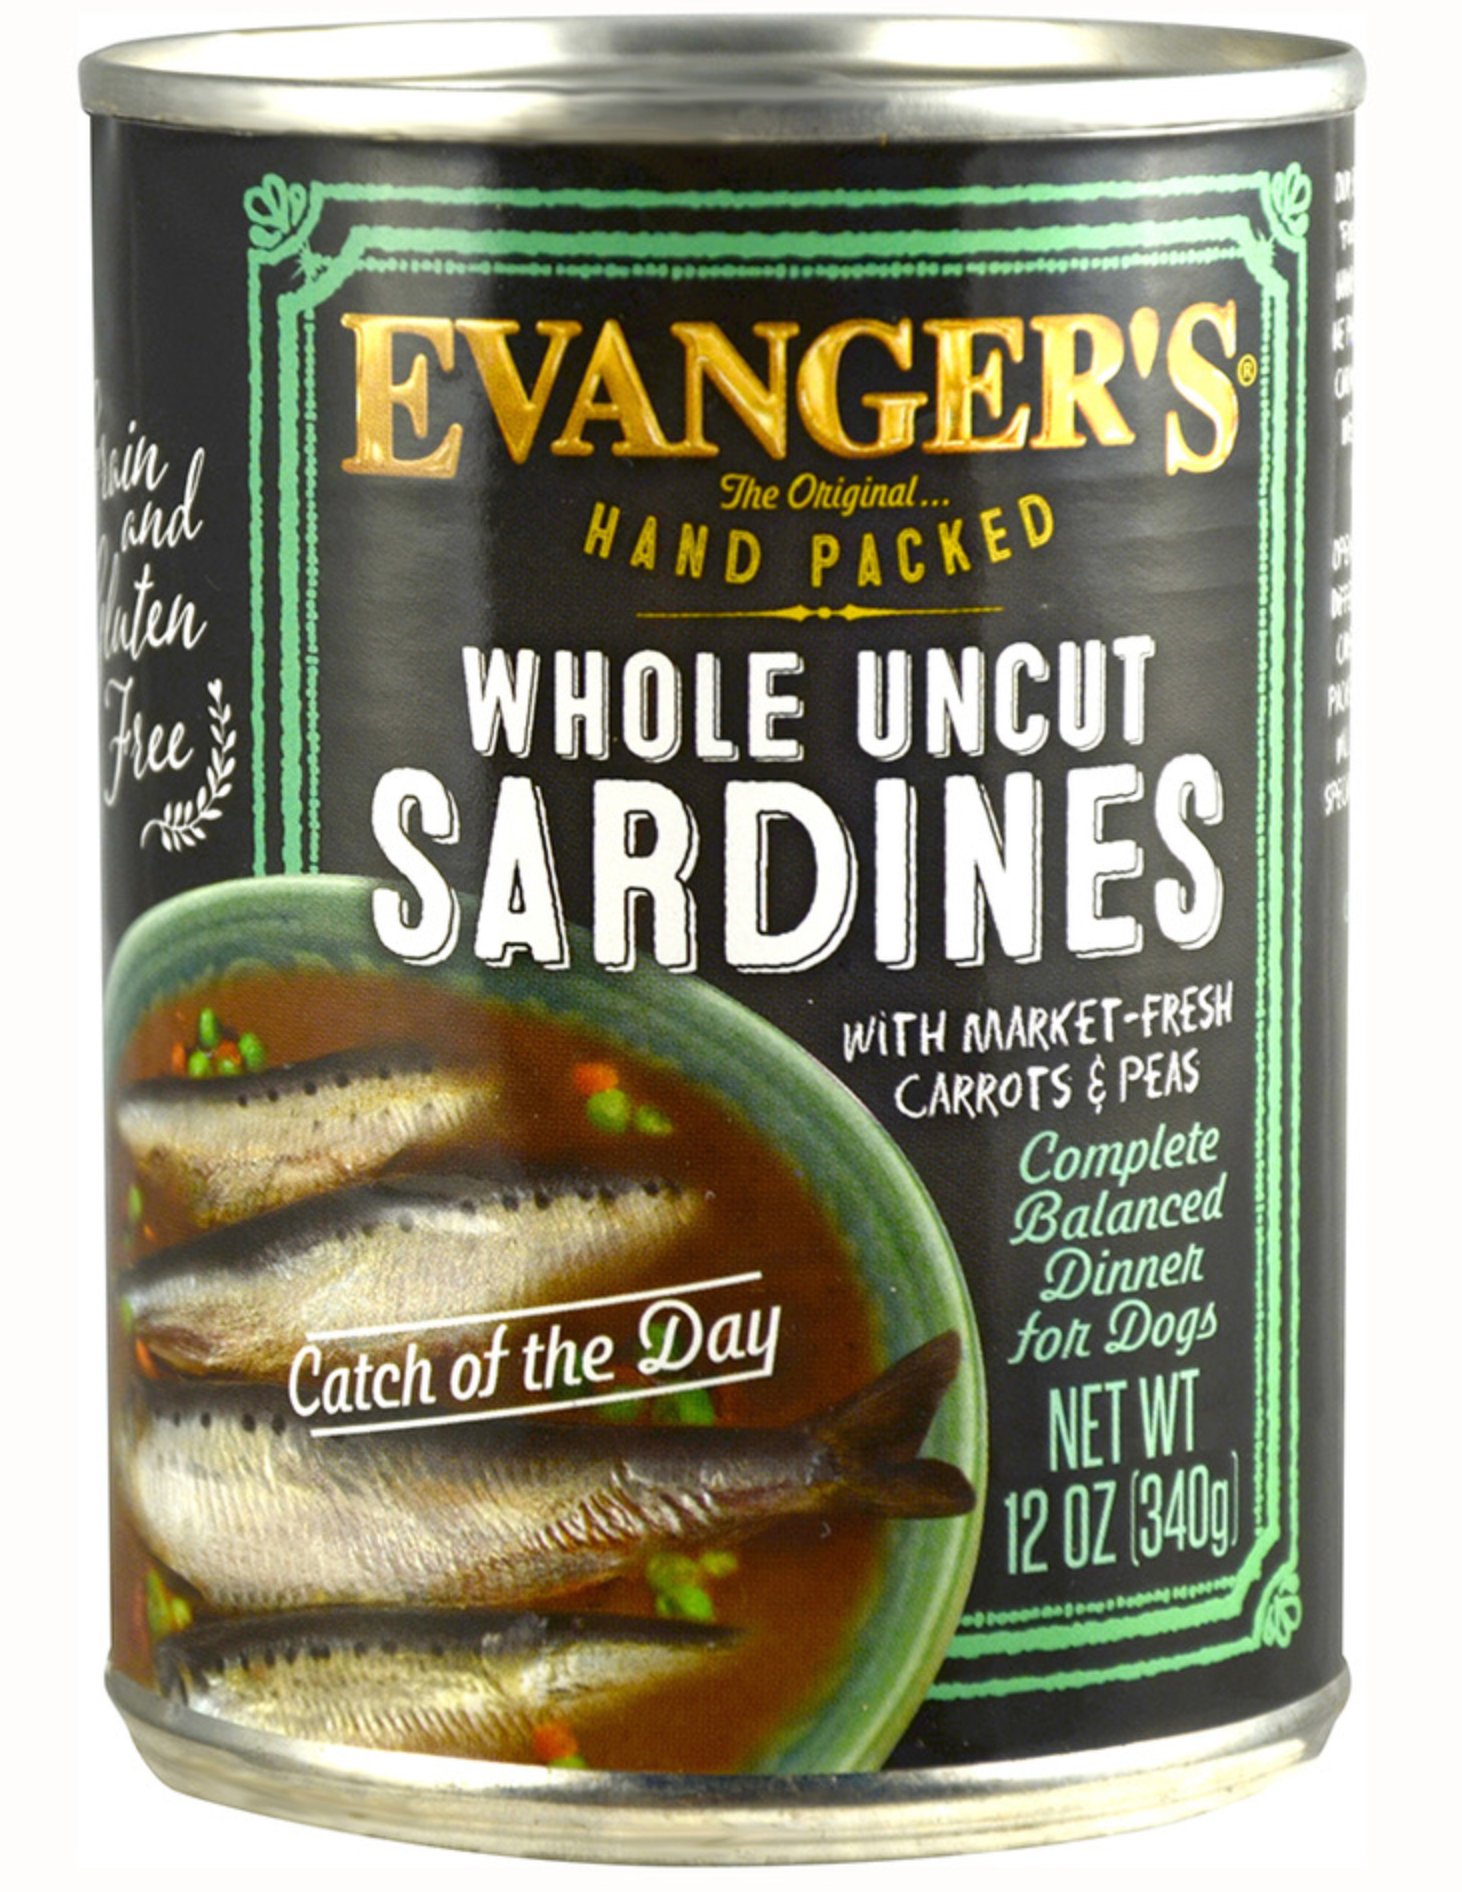 Evanger's Hand Packed "Catch of the Day" Whole Sardine Canned Dog Food, 6 oz